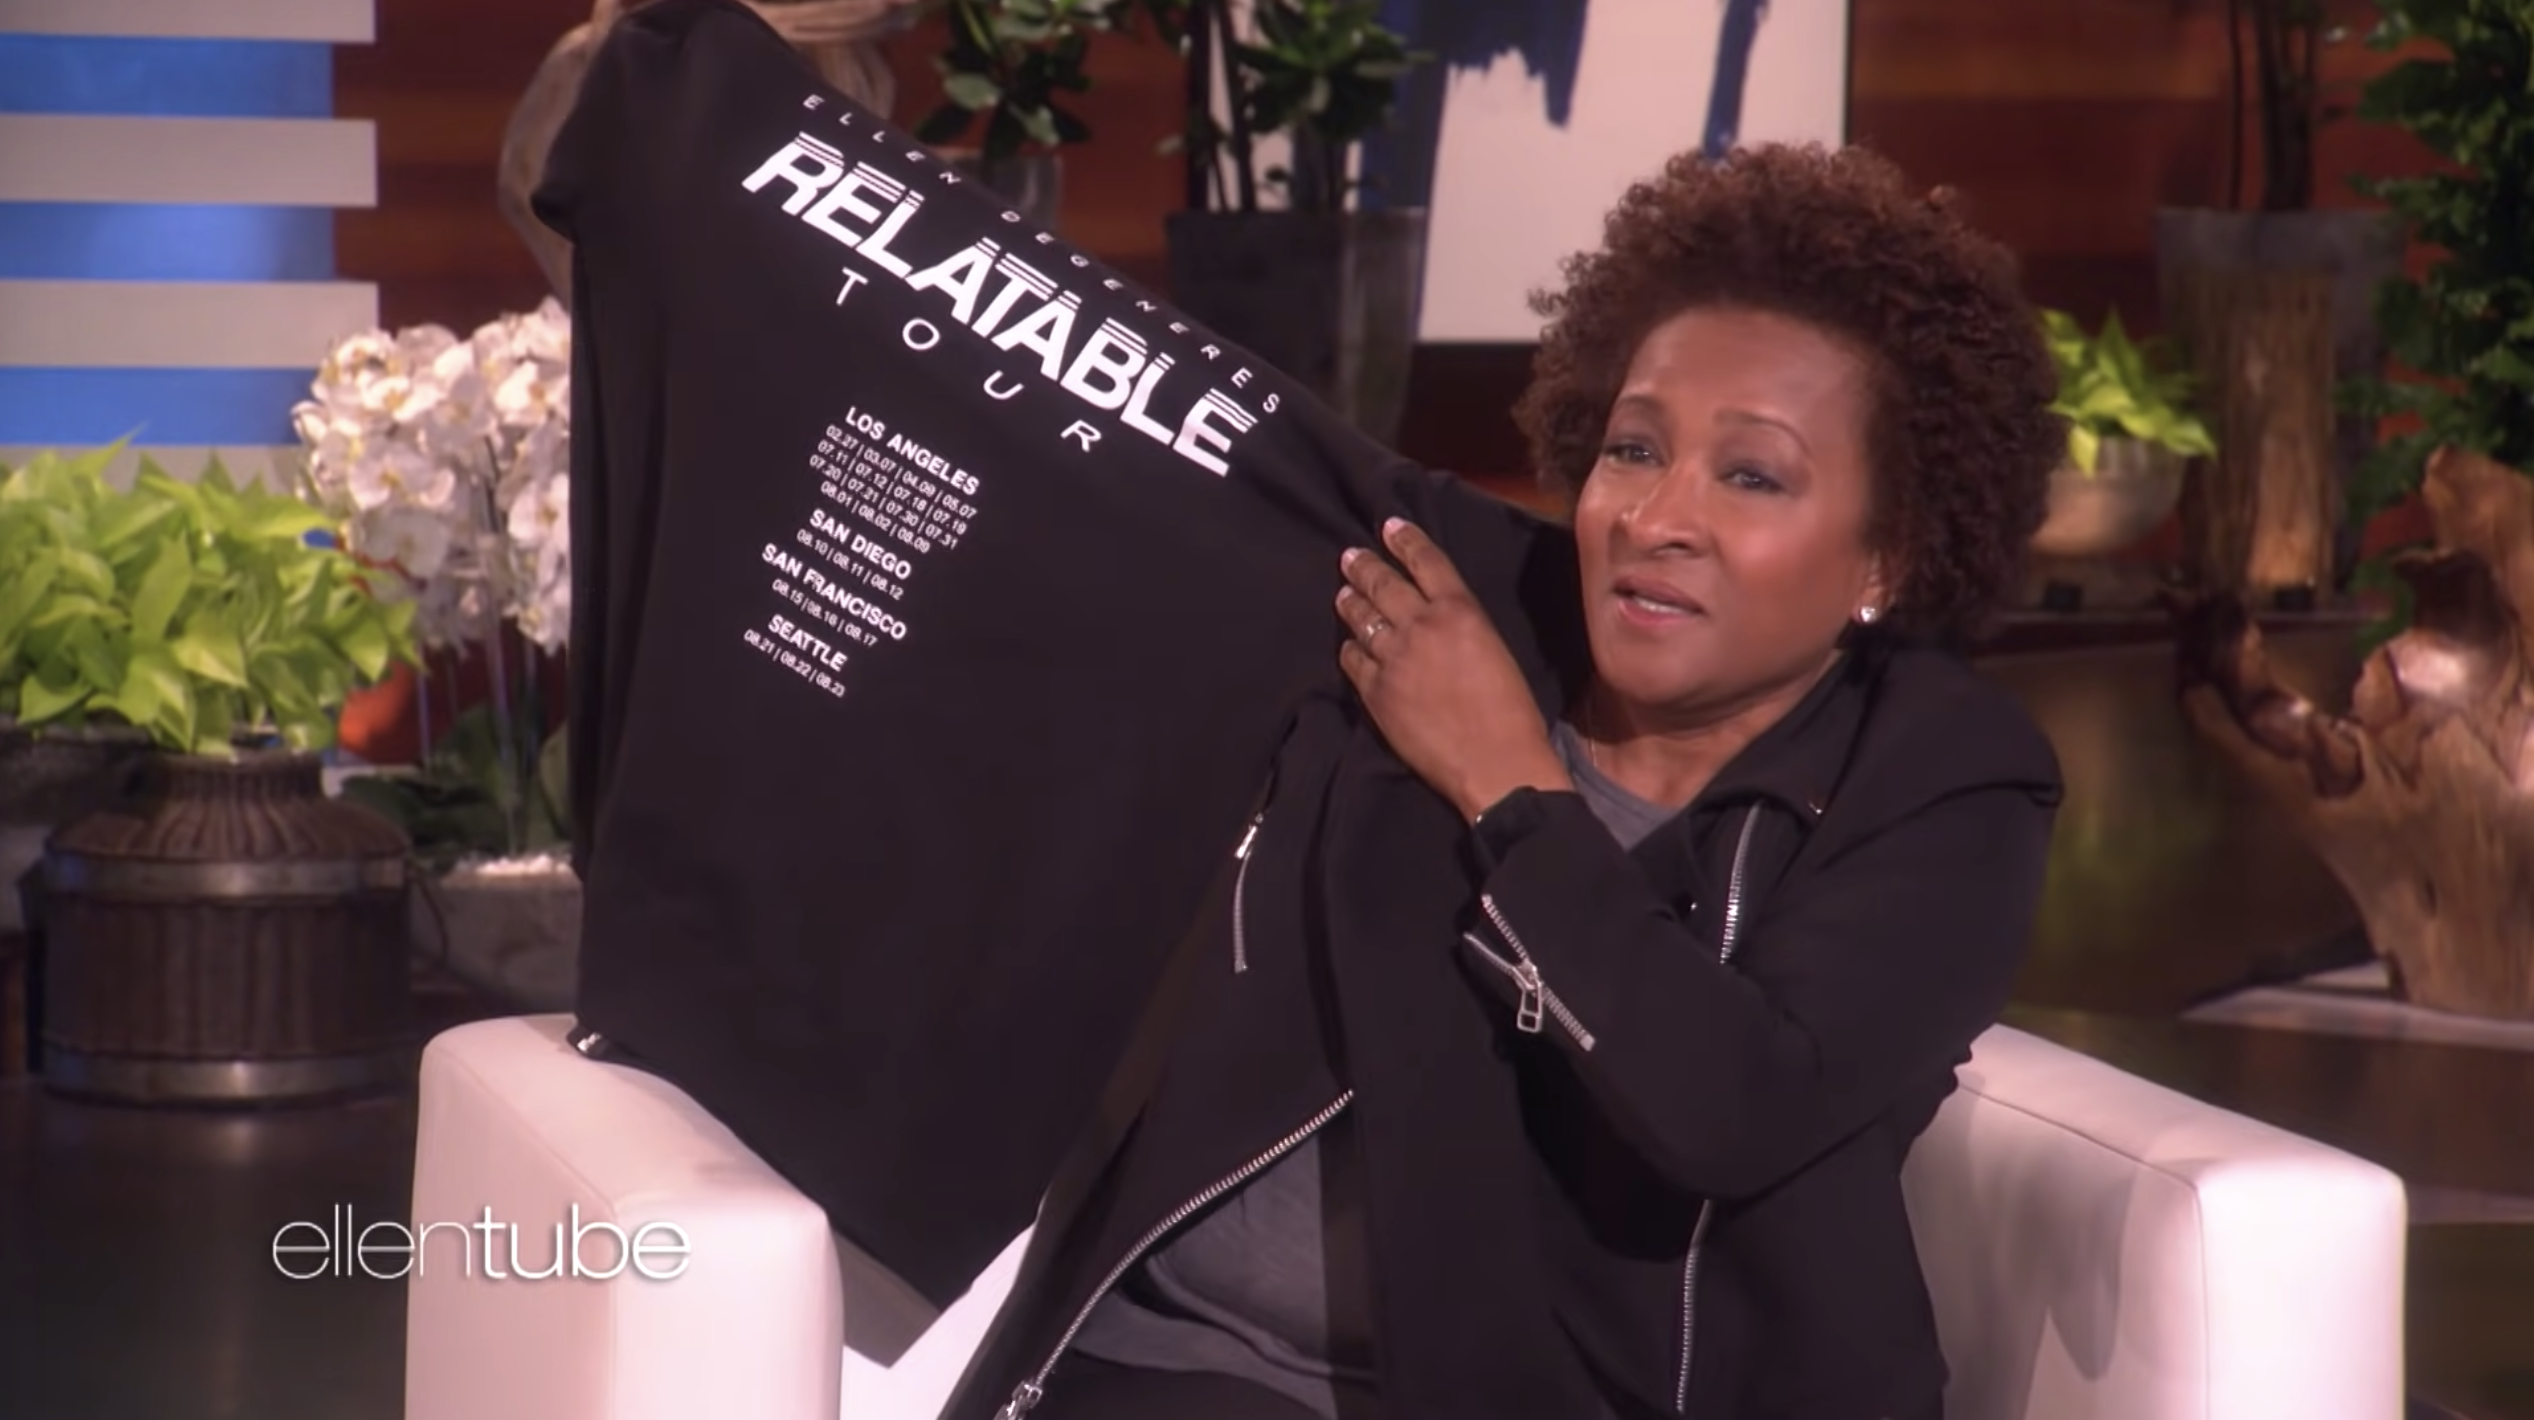 Wanda Sykes appearing on The Ellen Show and holding up a tour T shirt